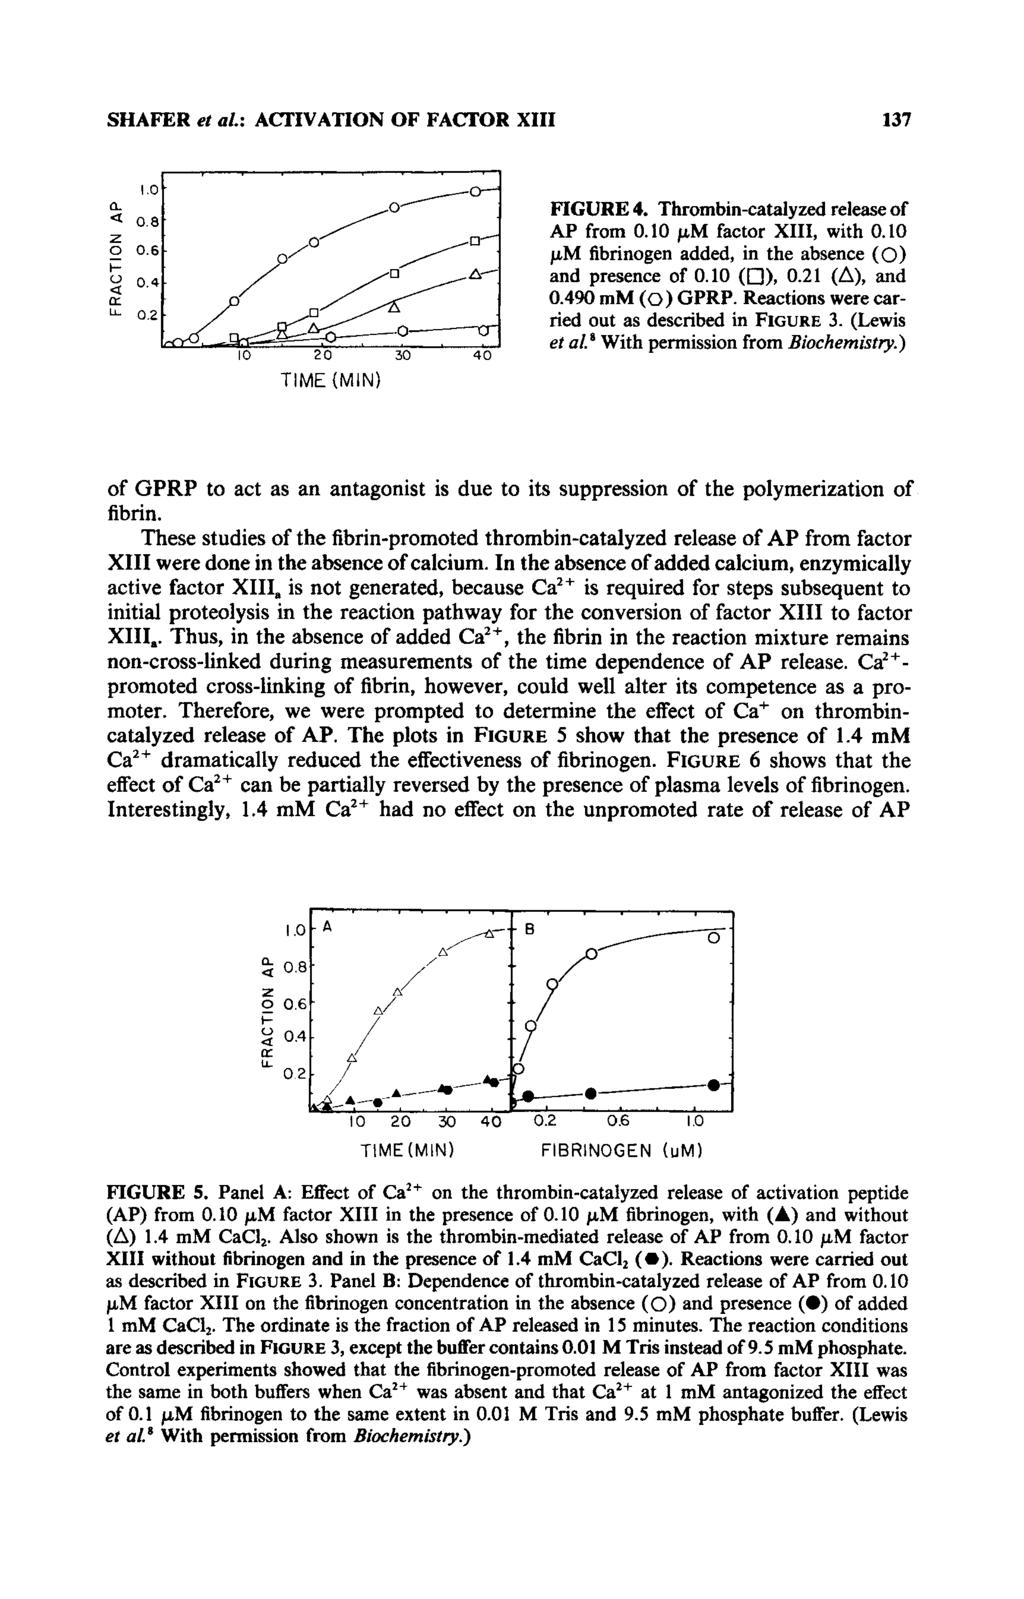 SHAFER et 01.: ACTIVATION OF FACTOR XI11 137 I- 2 0.4 n lj. 0.2 / 10 20 30 40 FIGURE 4. Thrombin-catalyzed release of AP from 0.10 pm factor XIII, with 0.